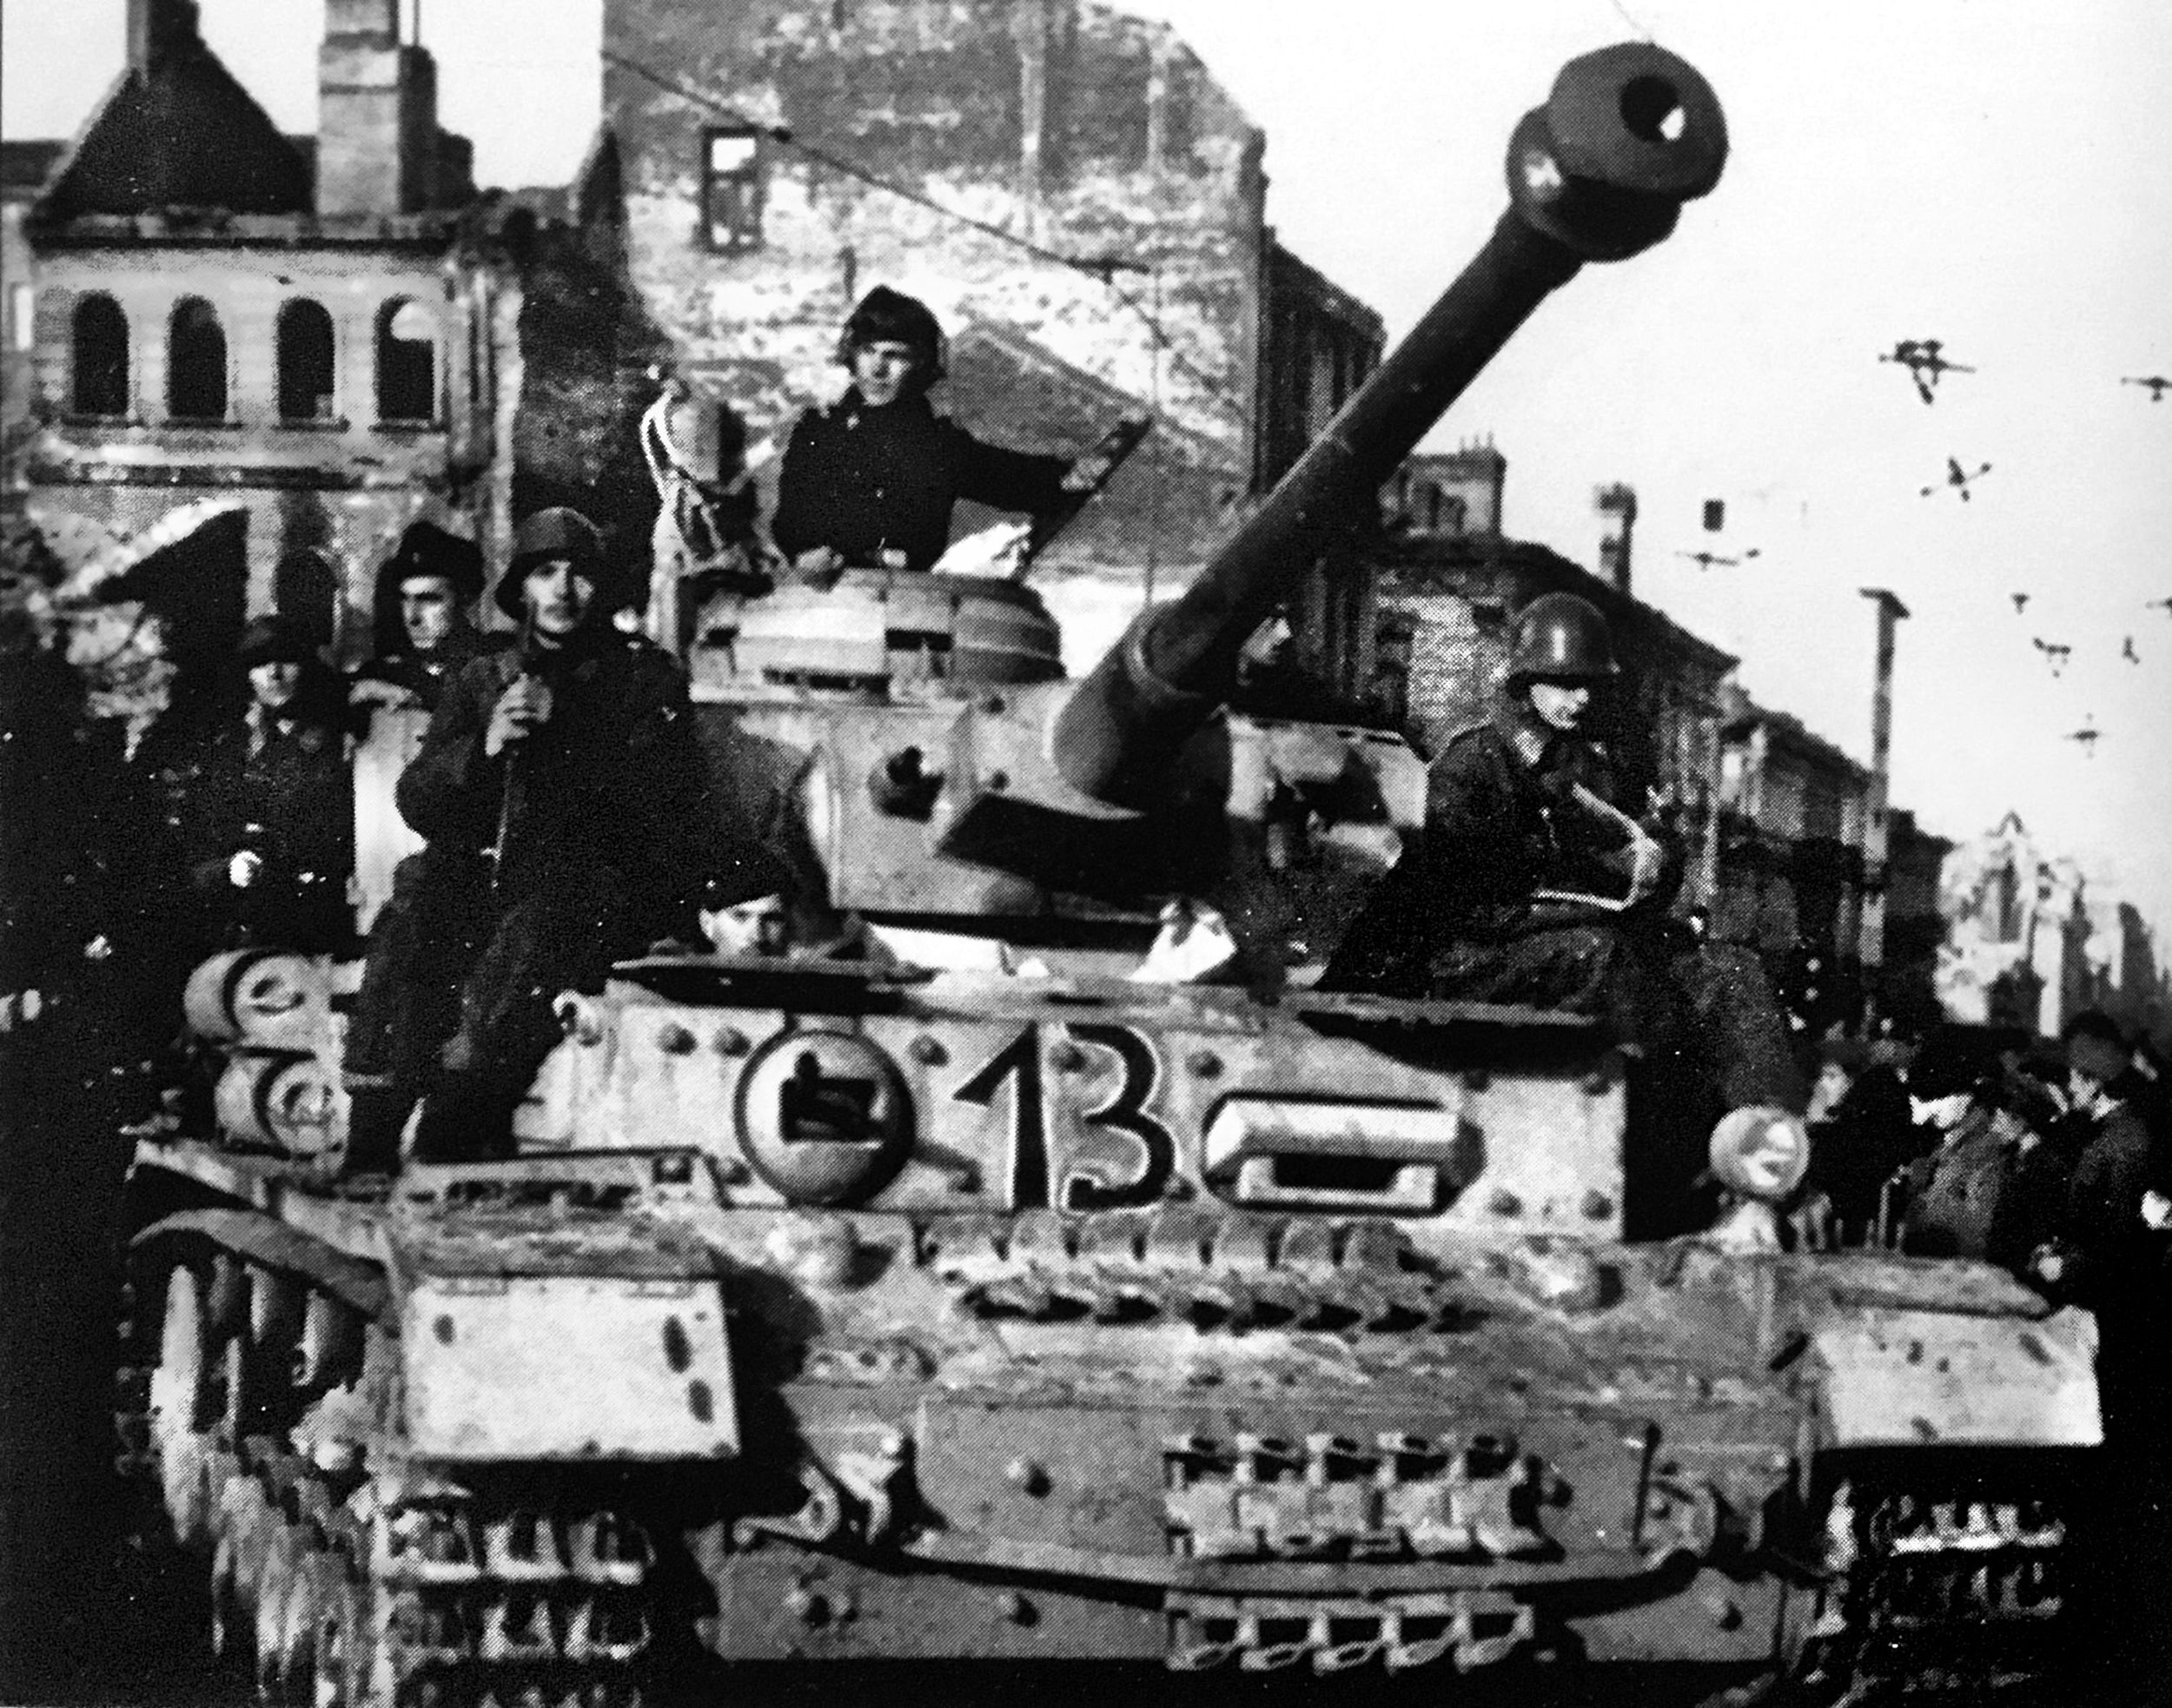 Bulgarian Army soldiers with a German Pz.IV Ausf H in Sofia, December 1944. For the first nine days of September, Bulgaria had been at war with the Axis and the Allies. But with Soviets in control of neighboring Romania, the Bulgarians began secret peace talks with the Allies in Turkey. Stalin preempted the talks as the Red Army swept into the capital and set up a new government with Communists in effective control. A month later the government sent a delegation to Moscow to sign an armistice.